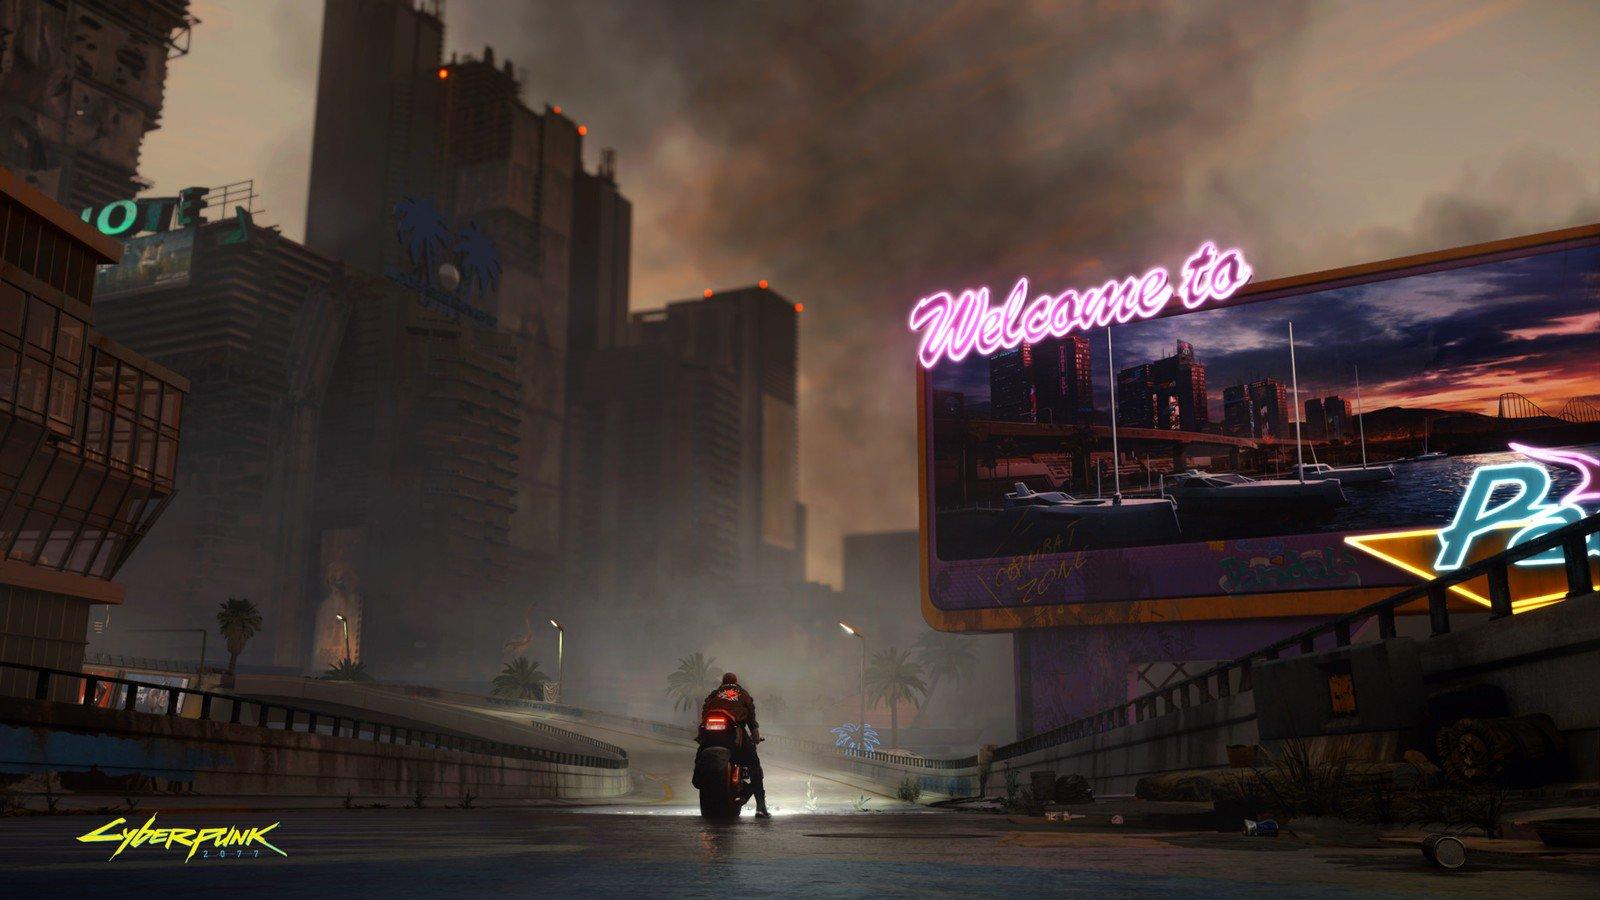 Cyberpunk 2077 E3 2019 preview: In among the glorious violence